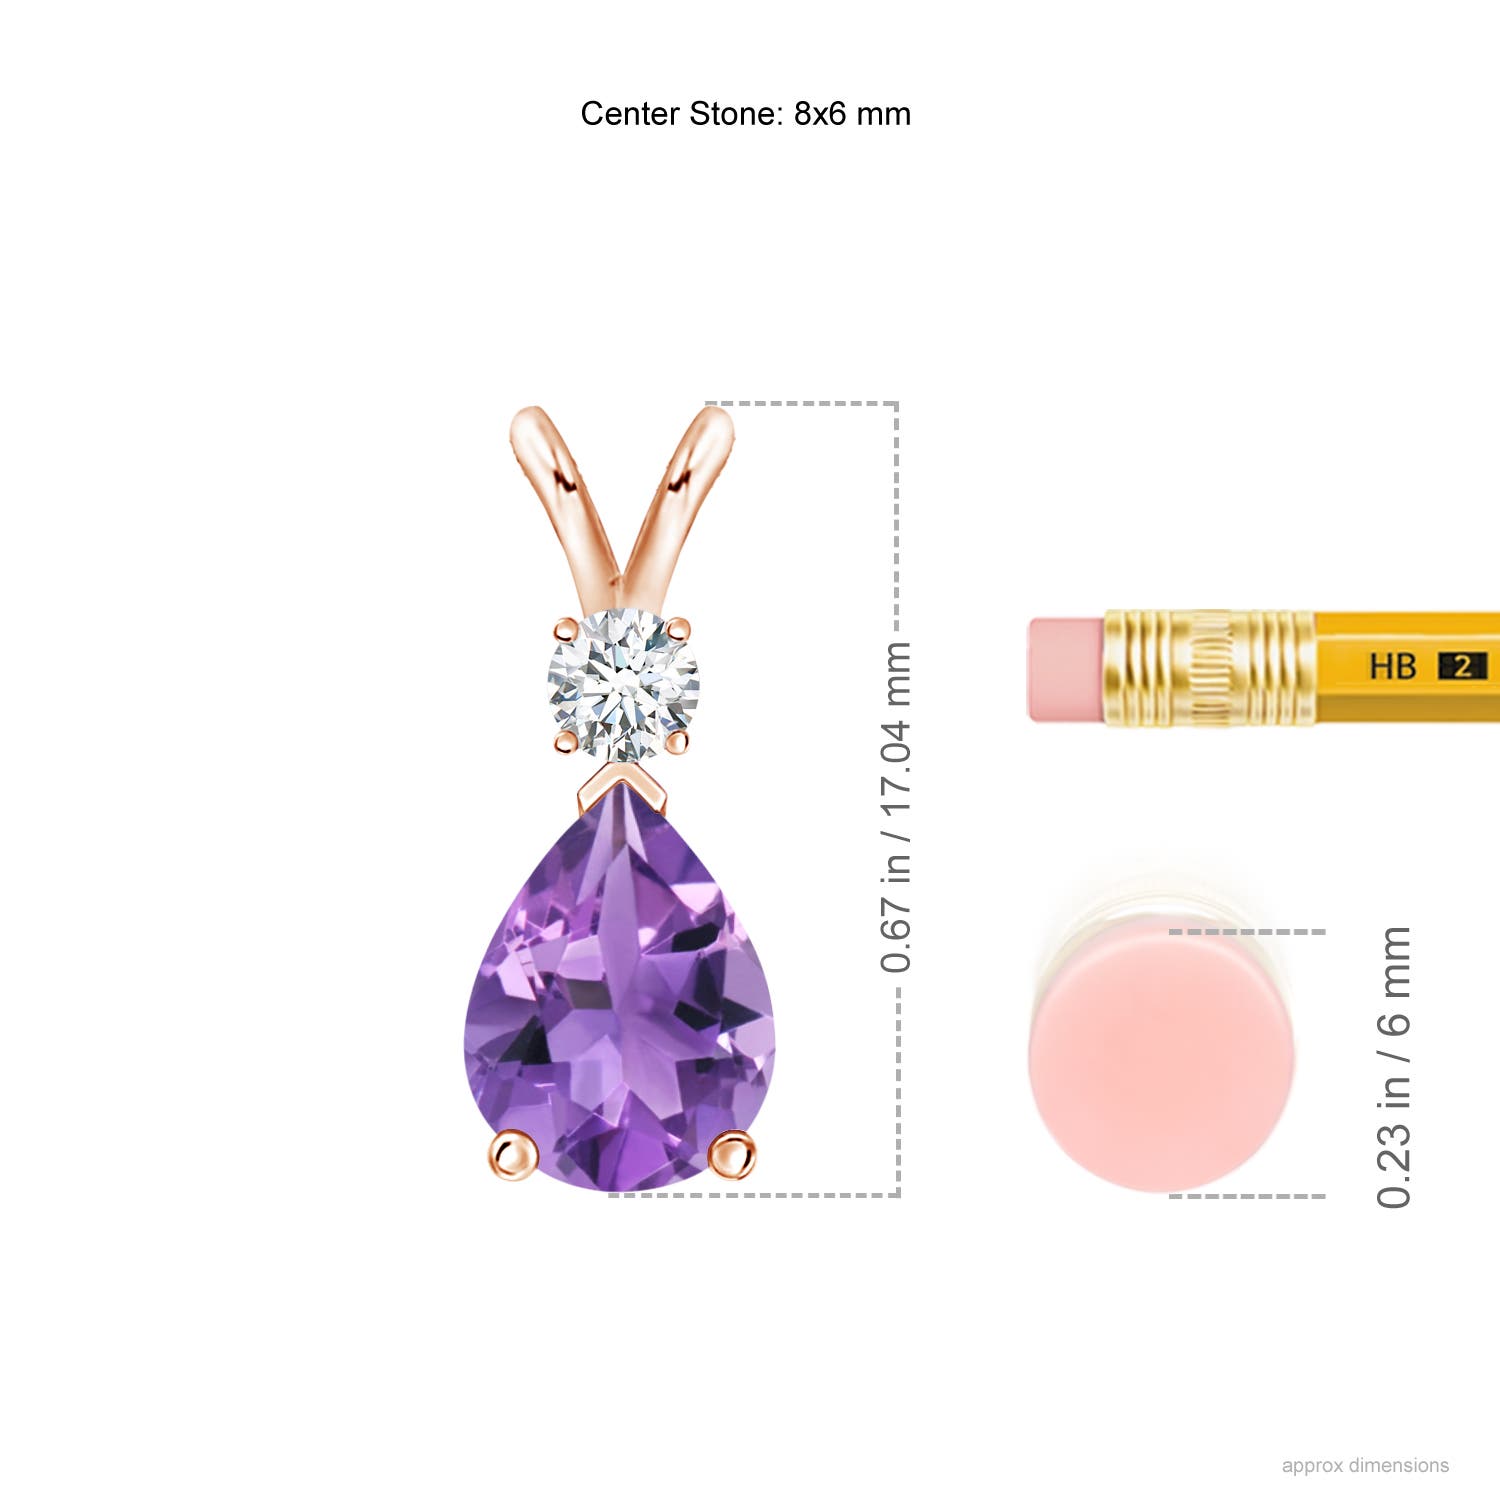 AA - Amethyst / 1.11 CT / 14 KT Rose Gold